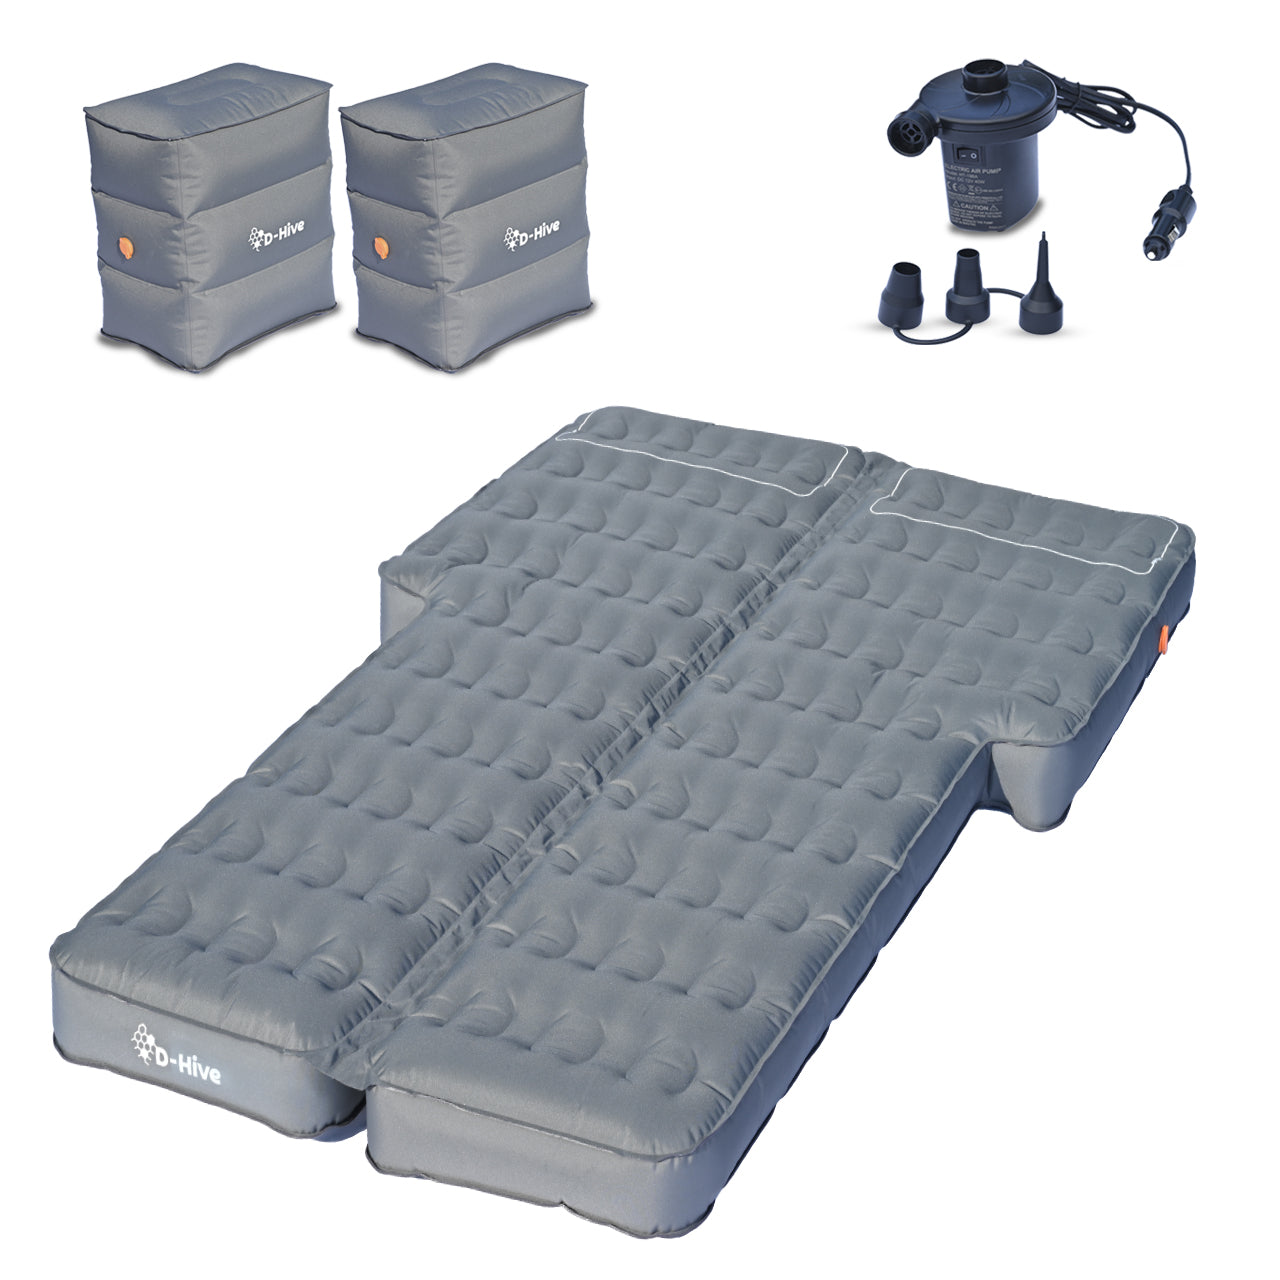 D-hive SUV Car Air Mattress Inflatable with Base extenders and electric pump